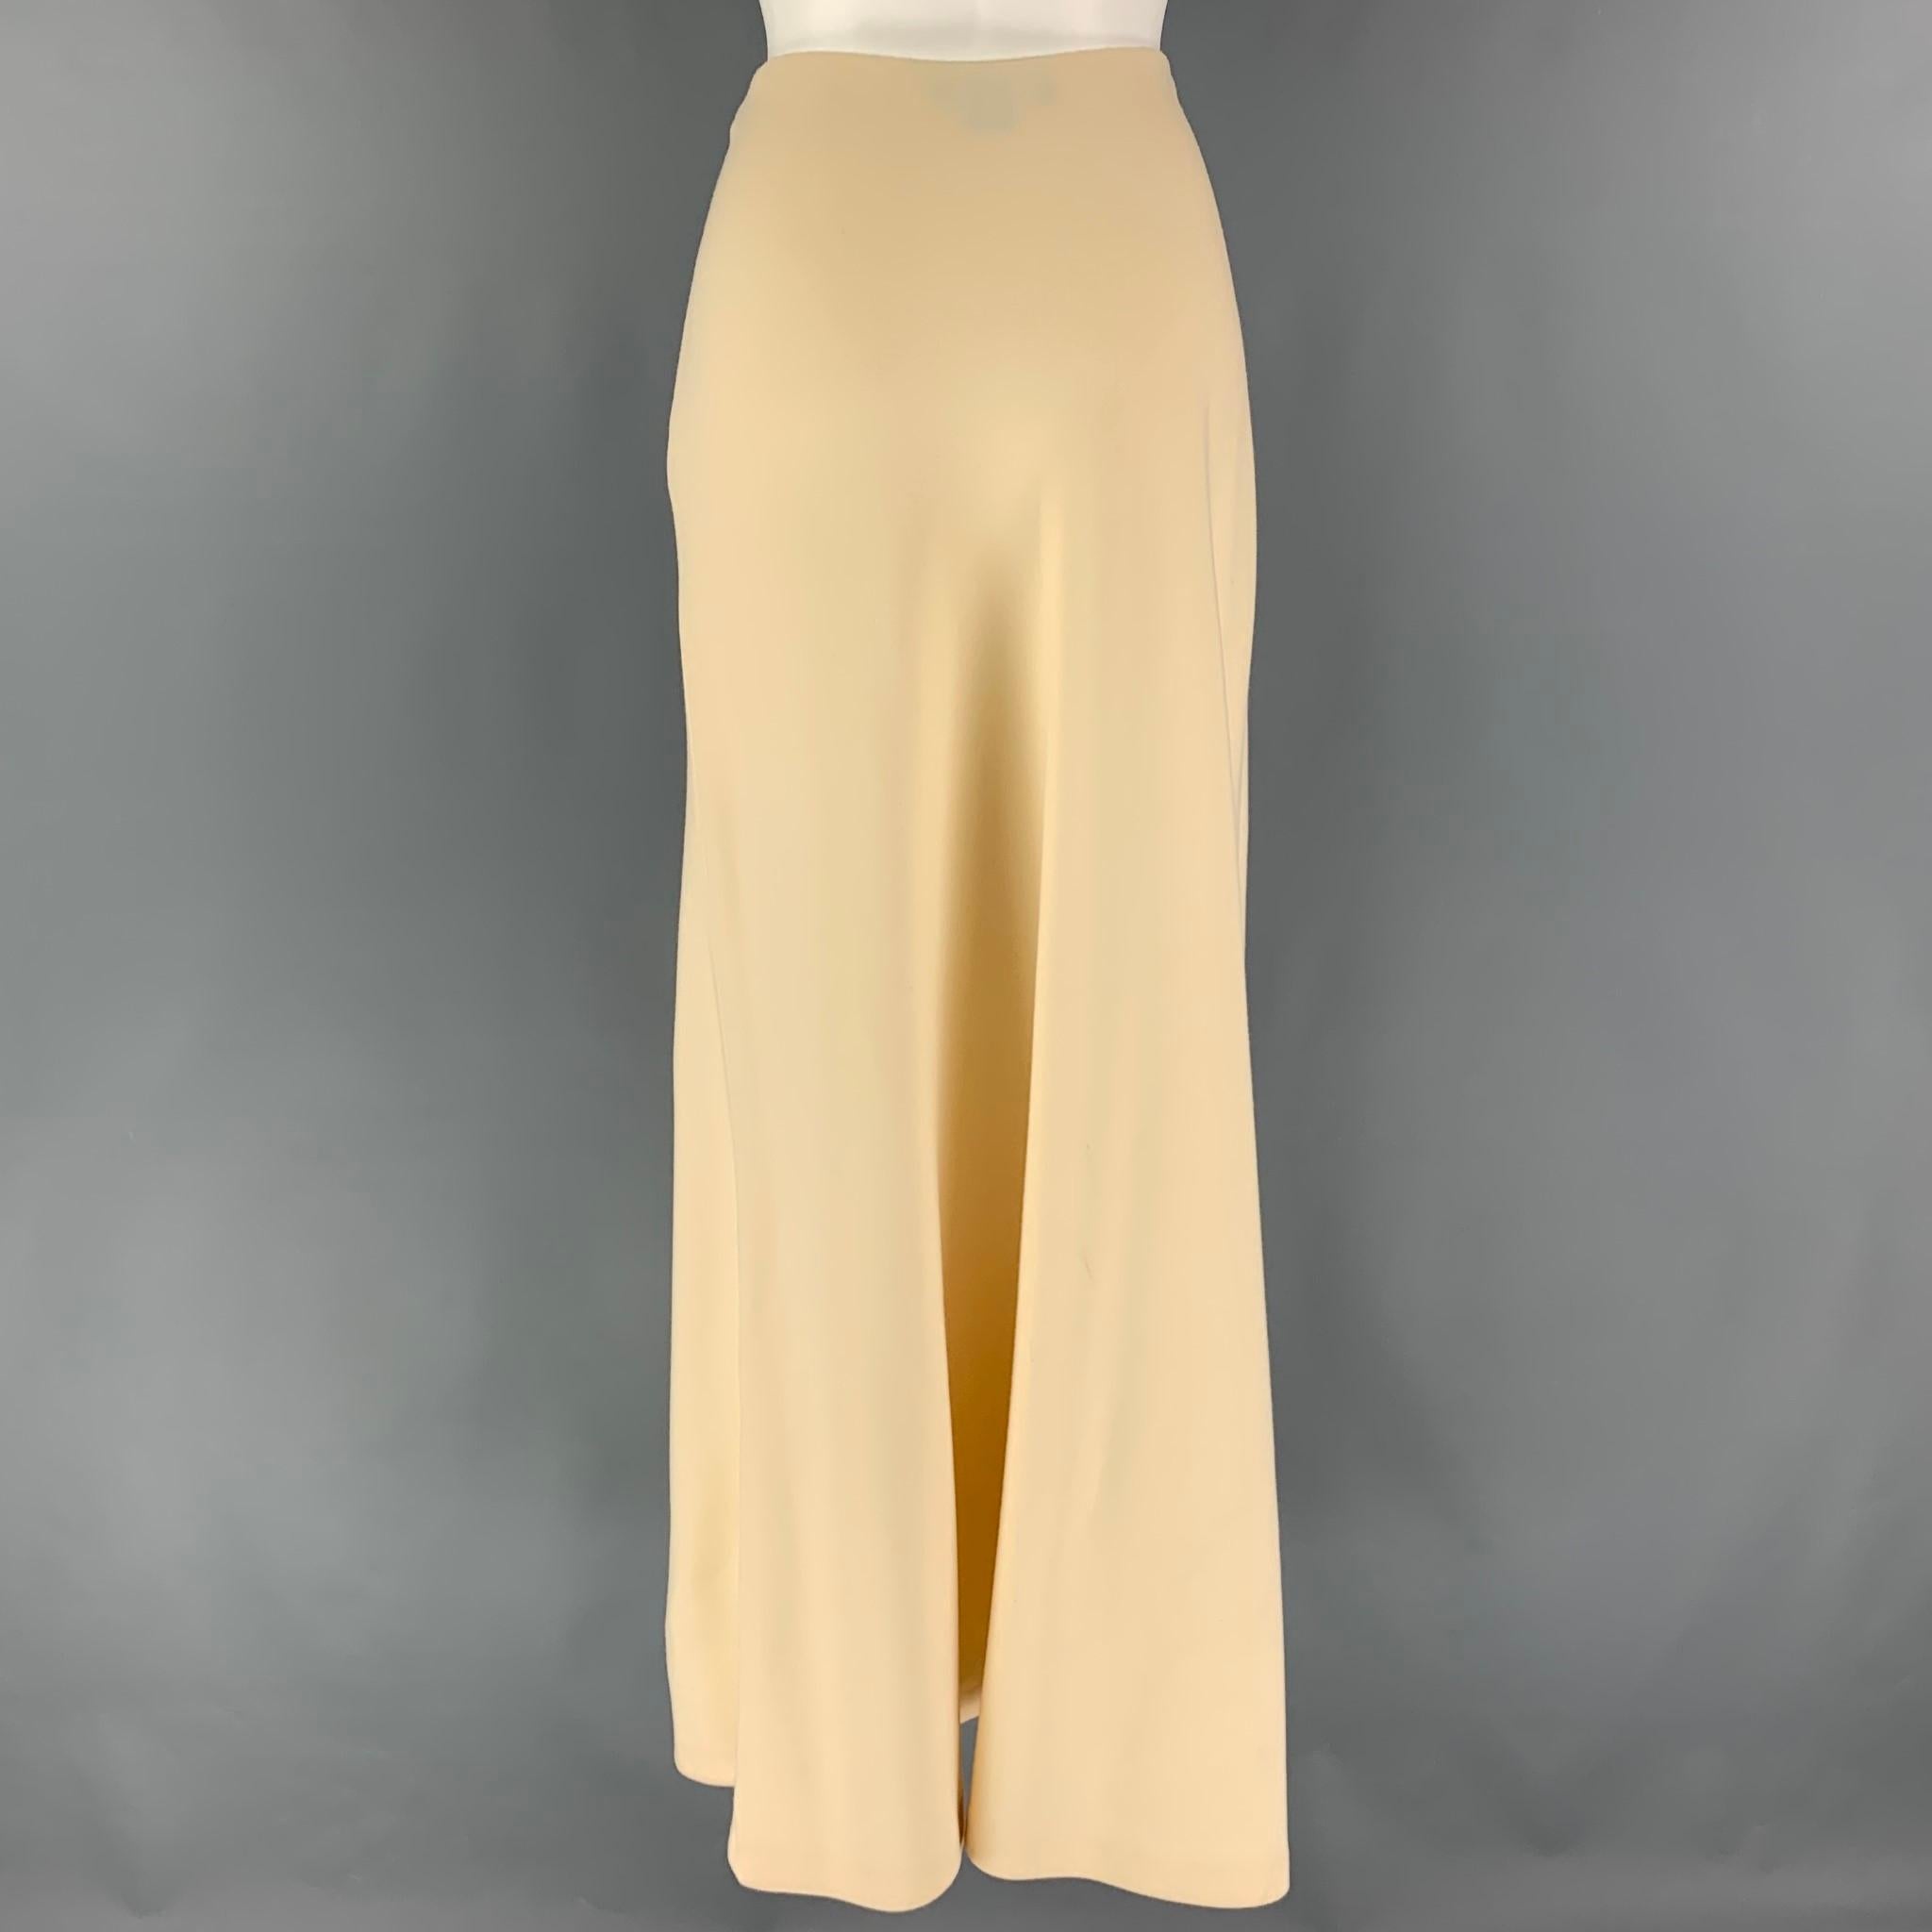 RALPH LAUREN Collection long skirt comes in a cream wool featuring an a-line style and a side zip up closure. Made in USA. 

Very Good Pre-Owned Condition.
Marked: 10

Measurements:

Waist: 30 in.
Hip: 40 in.
Length: 40 in. 